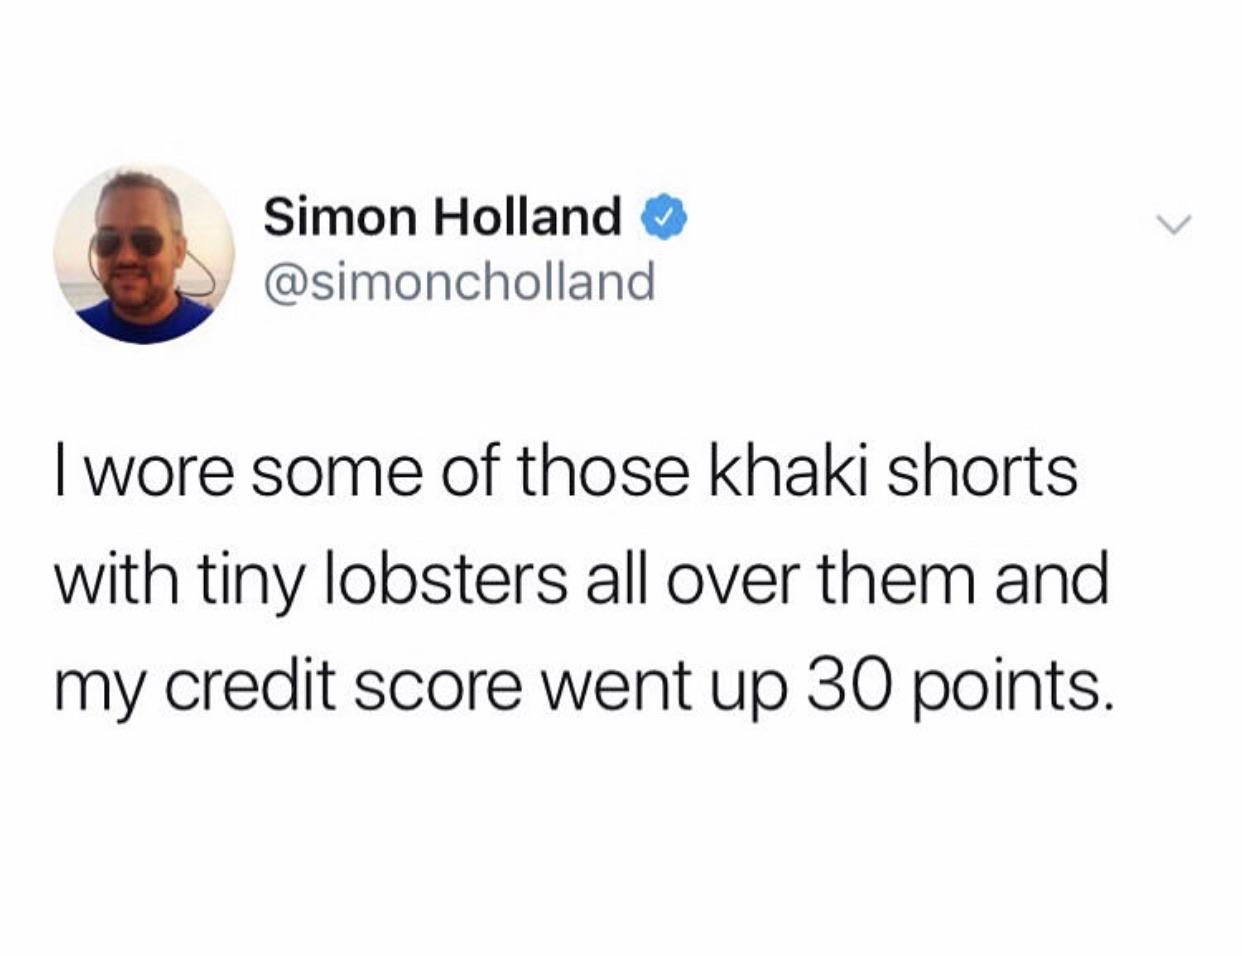 feel rain coming in your knee - Simon Holland I wore some of those khaki shorts with tiny lobsters all over them and my credit score went up 30 points.